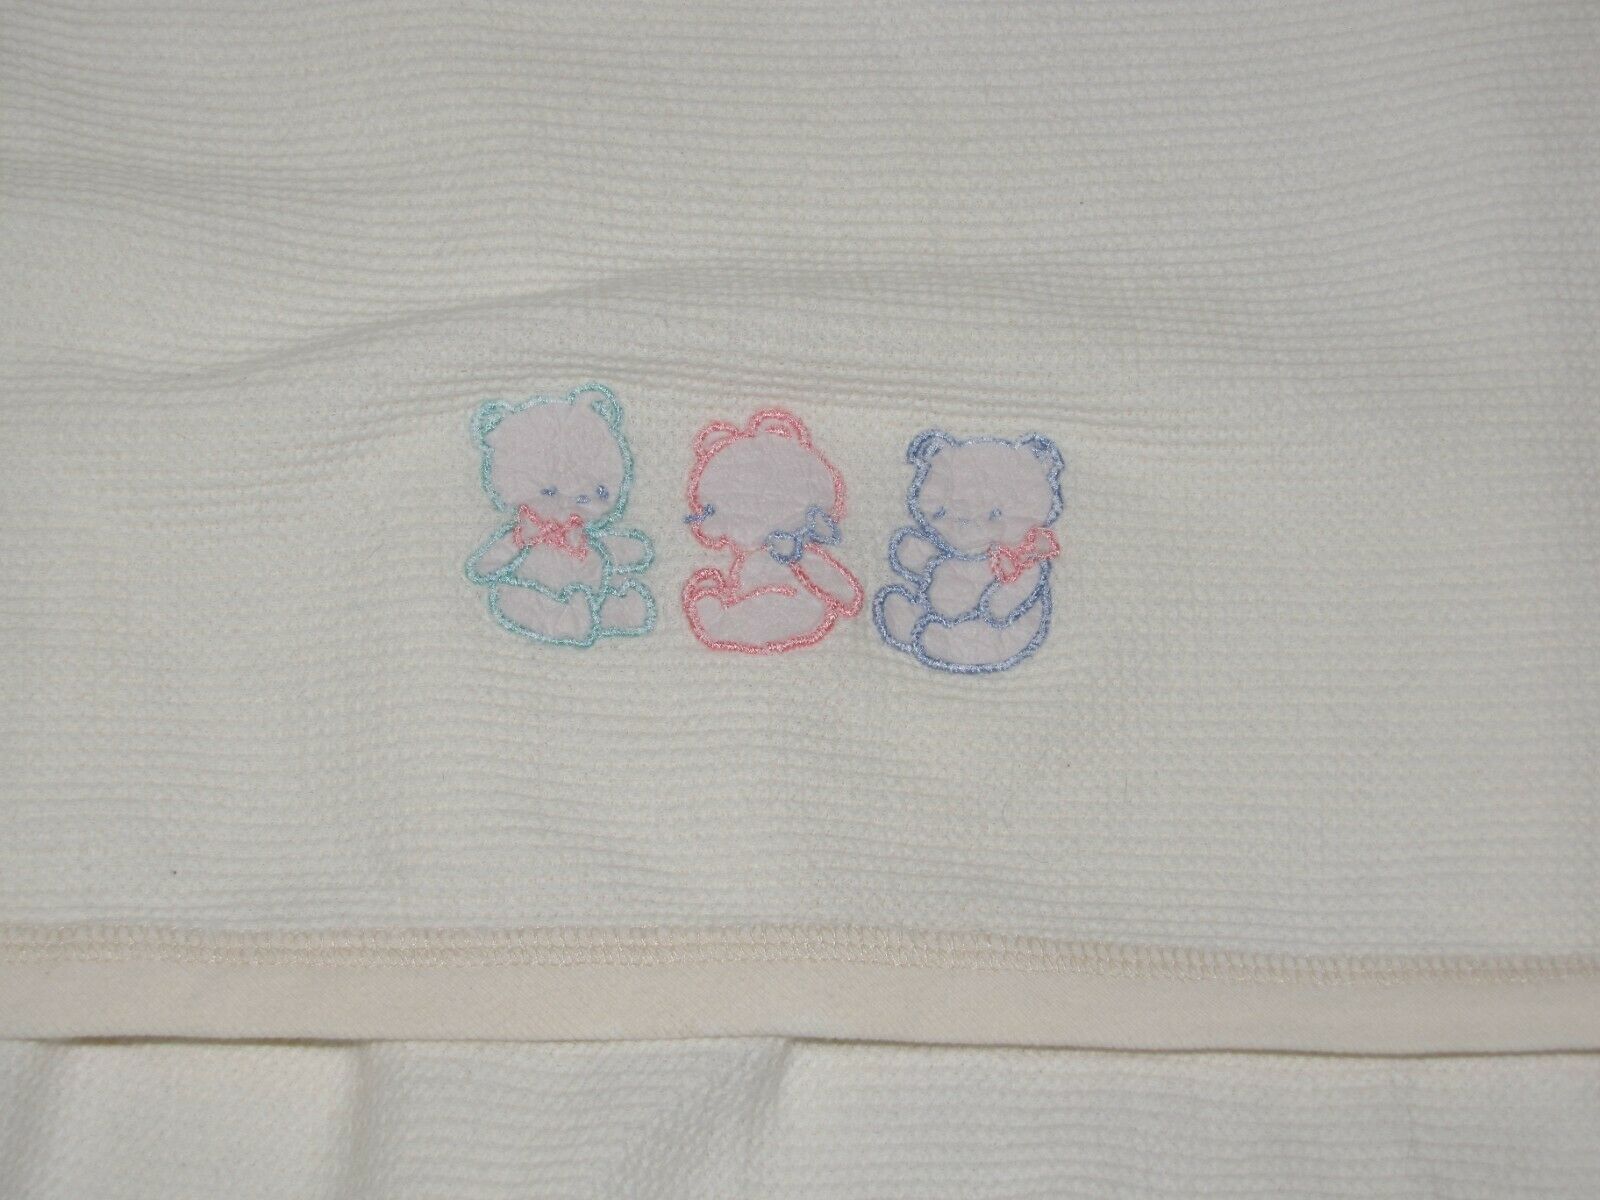 Primary image for Springmaid Cream/Ivory Cotton thermal waffle weave Pastel Teddy Bear Blanket